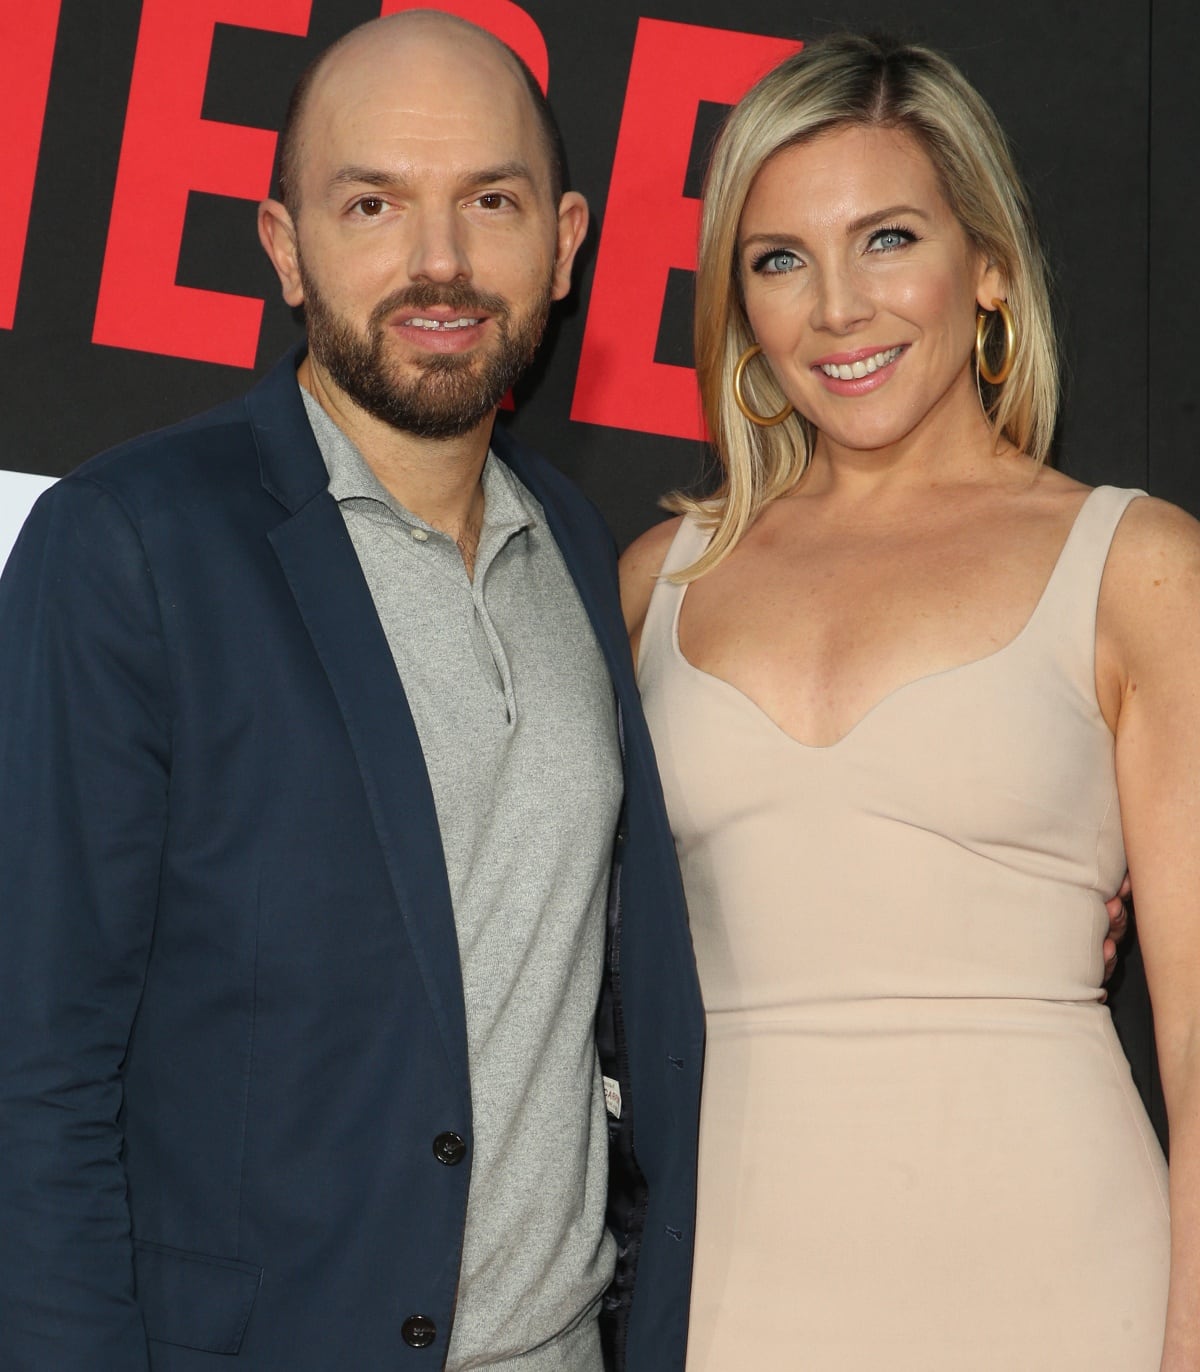 Paul Scheer and June Diane Raphael met in January 2004, when the artistic director of Manhattan's Upright Citizens Brigade Theatre brought Scheer in to offer advice to Raphael and her comedy partner Casey Wilson on making improvements to their UCB two-woman sketch show